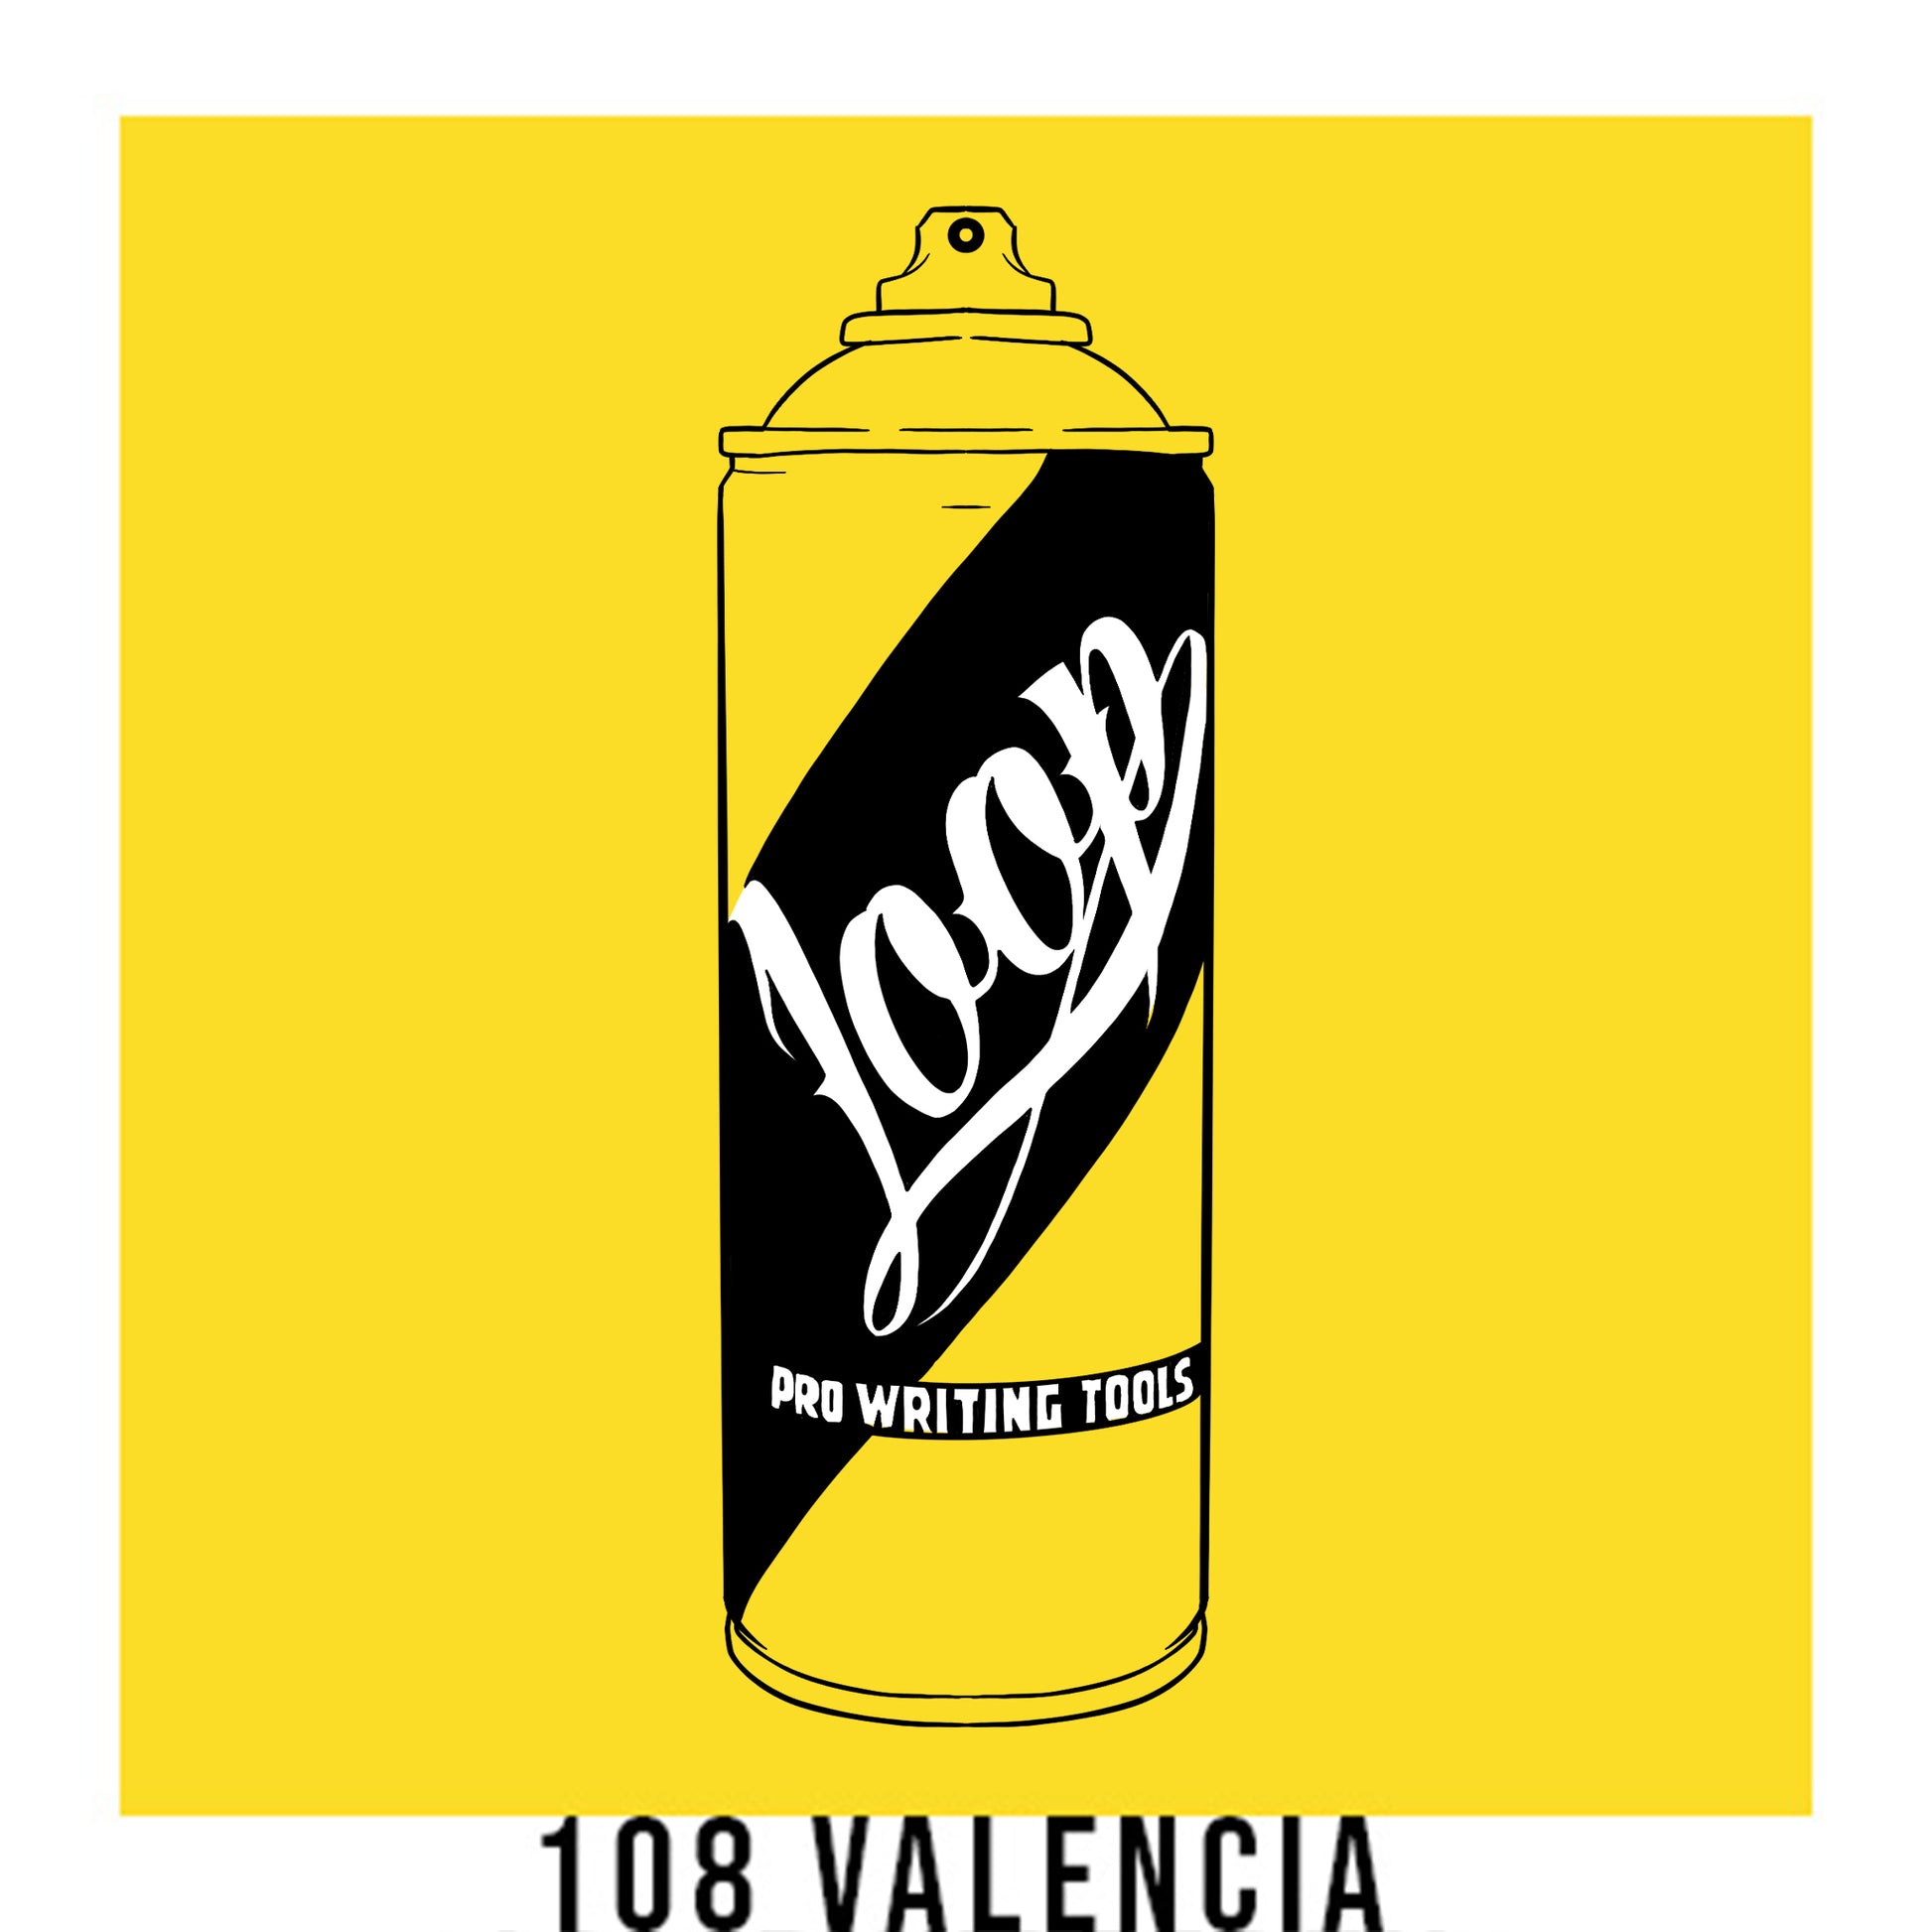 A black outline drawing of a light, bright yellow spray paint can with the word "Loop" written on the face in script. The background is a color swatch of the same yellow with a white border with the words "108 valencia" at the bottom.